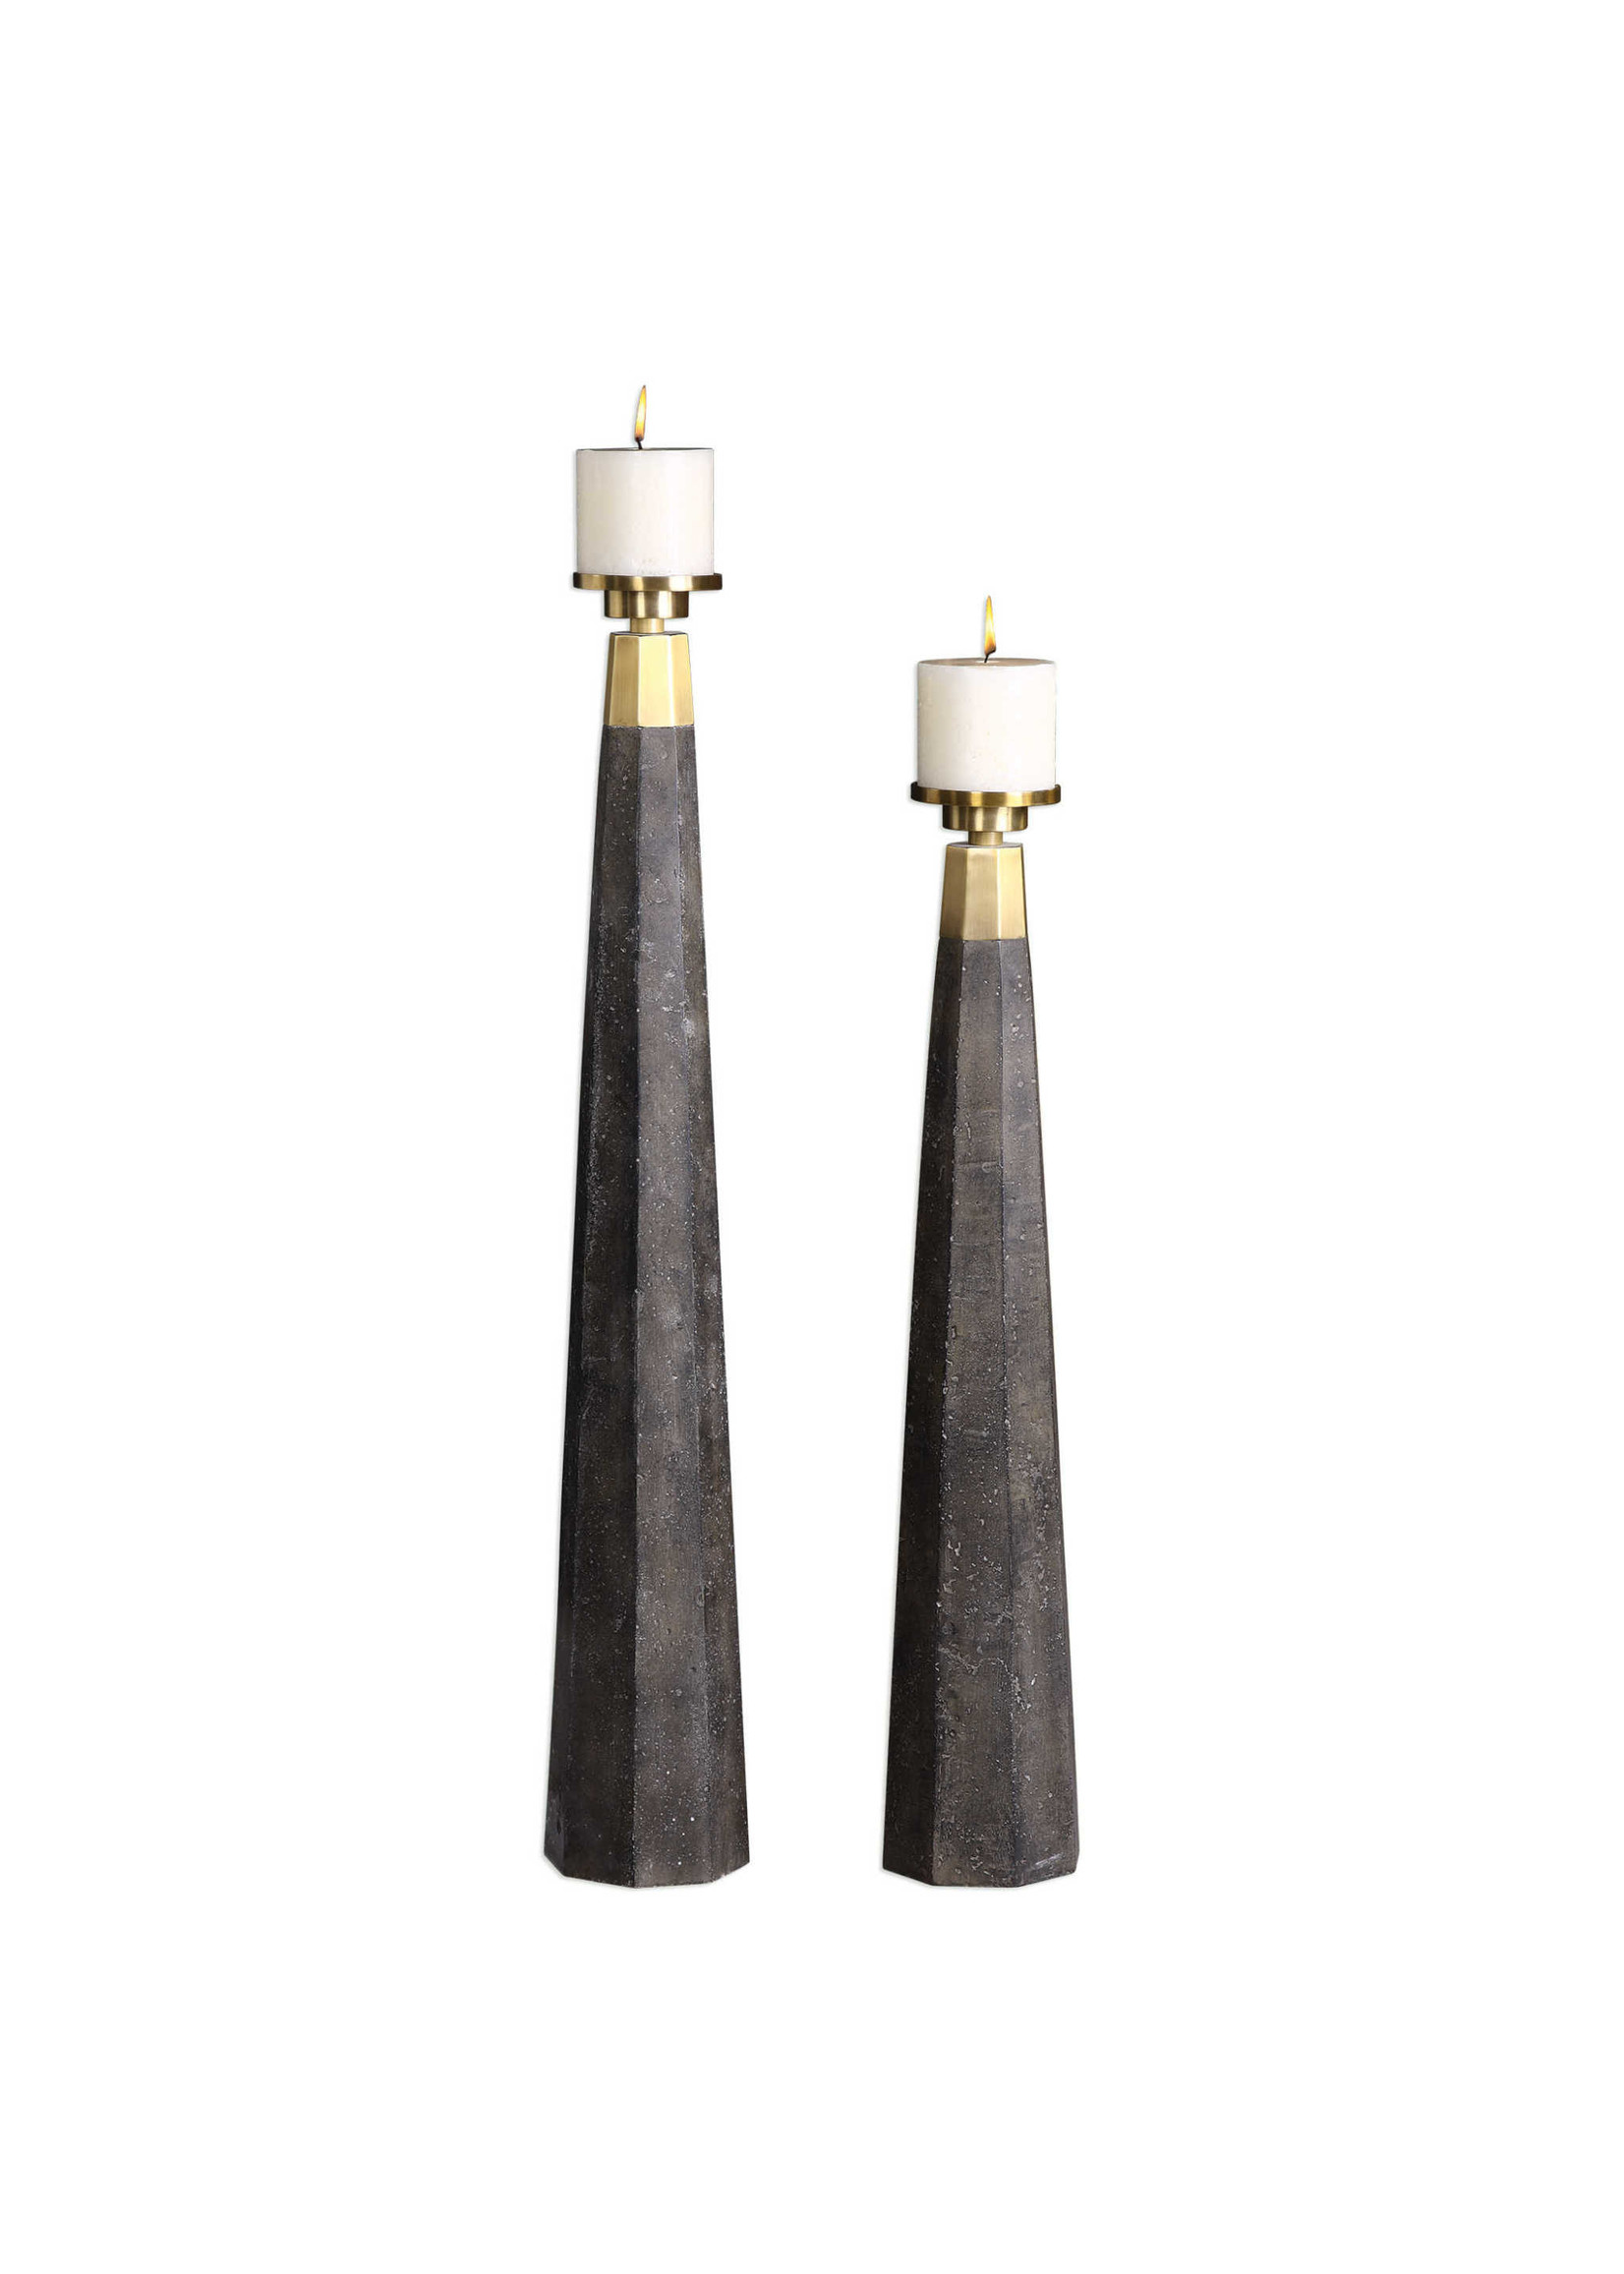 Uttermost / Revelation Pons Candleholder with Pillar Candle - Large 37.5" Includes candle